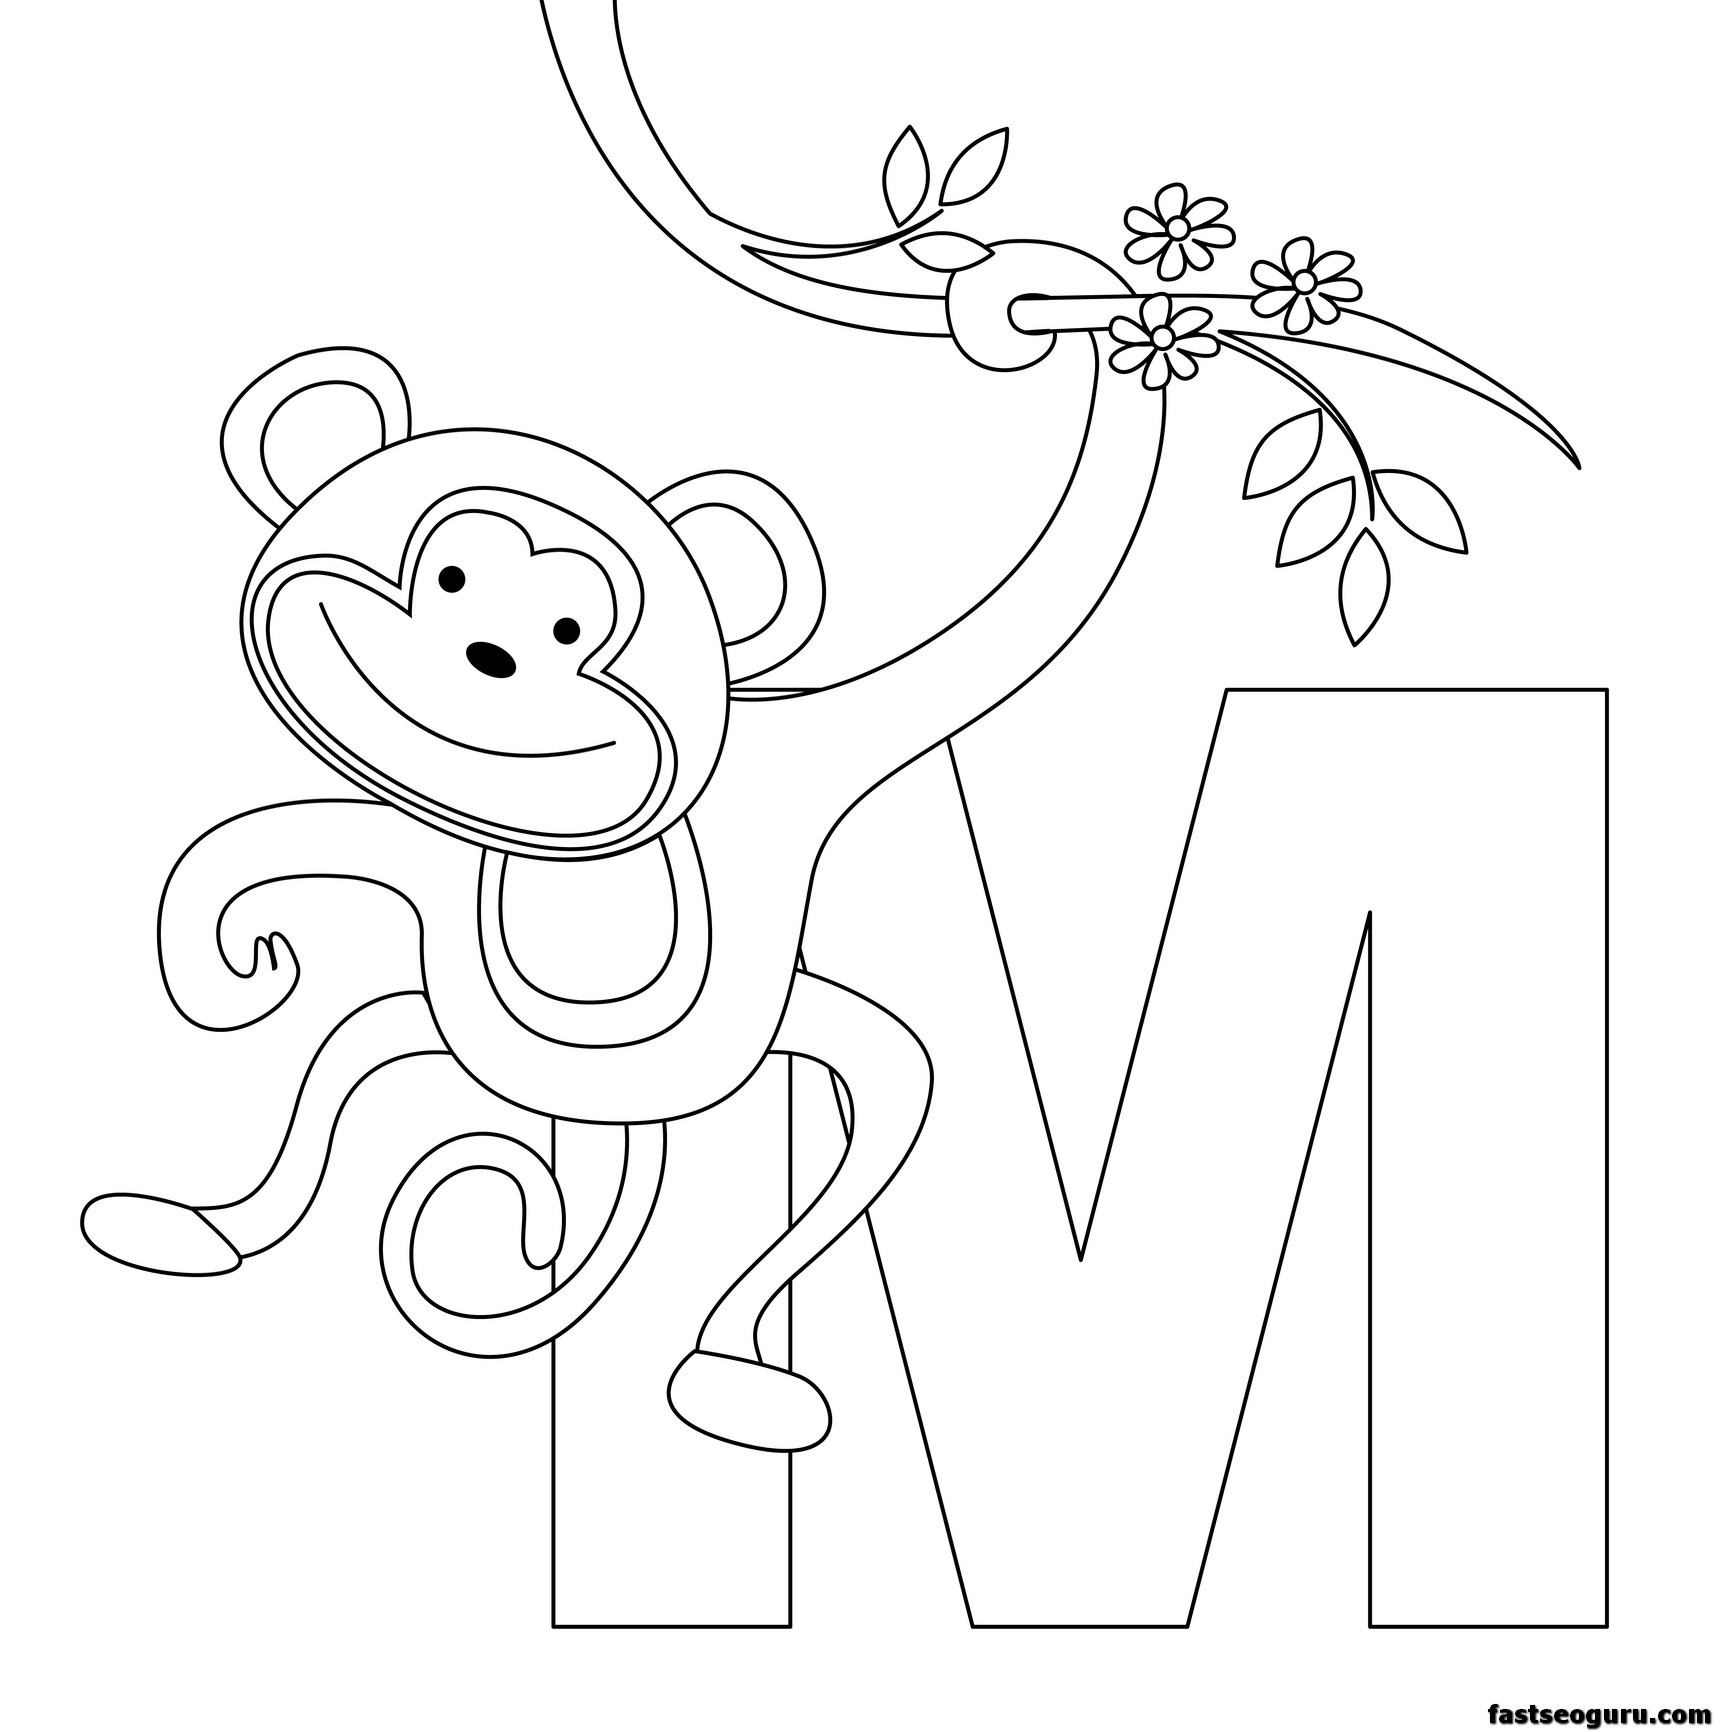 Letter Coloring Page Animal Alphabet Letters Coloring Pages